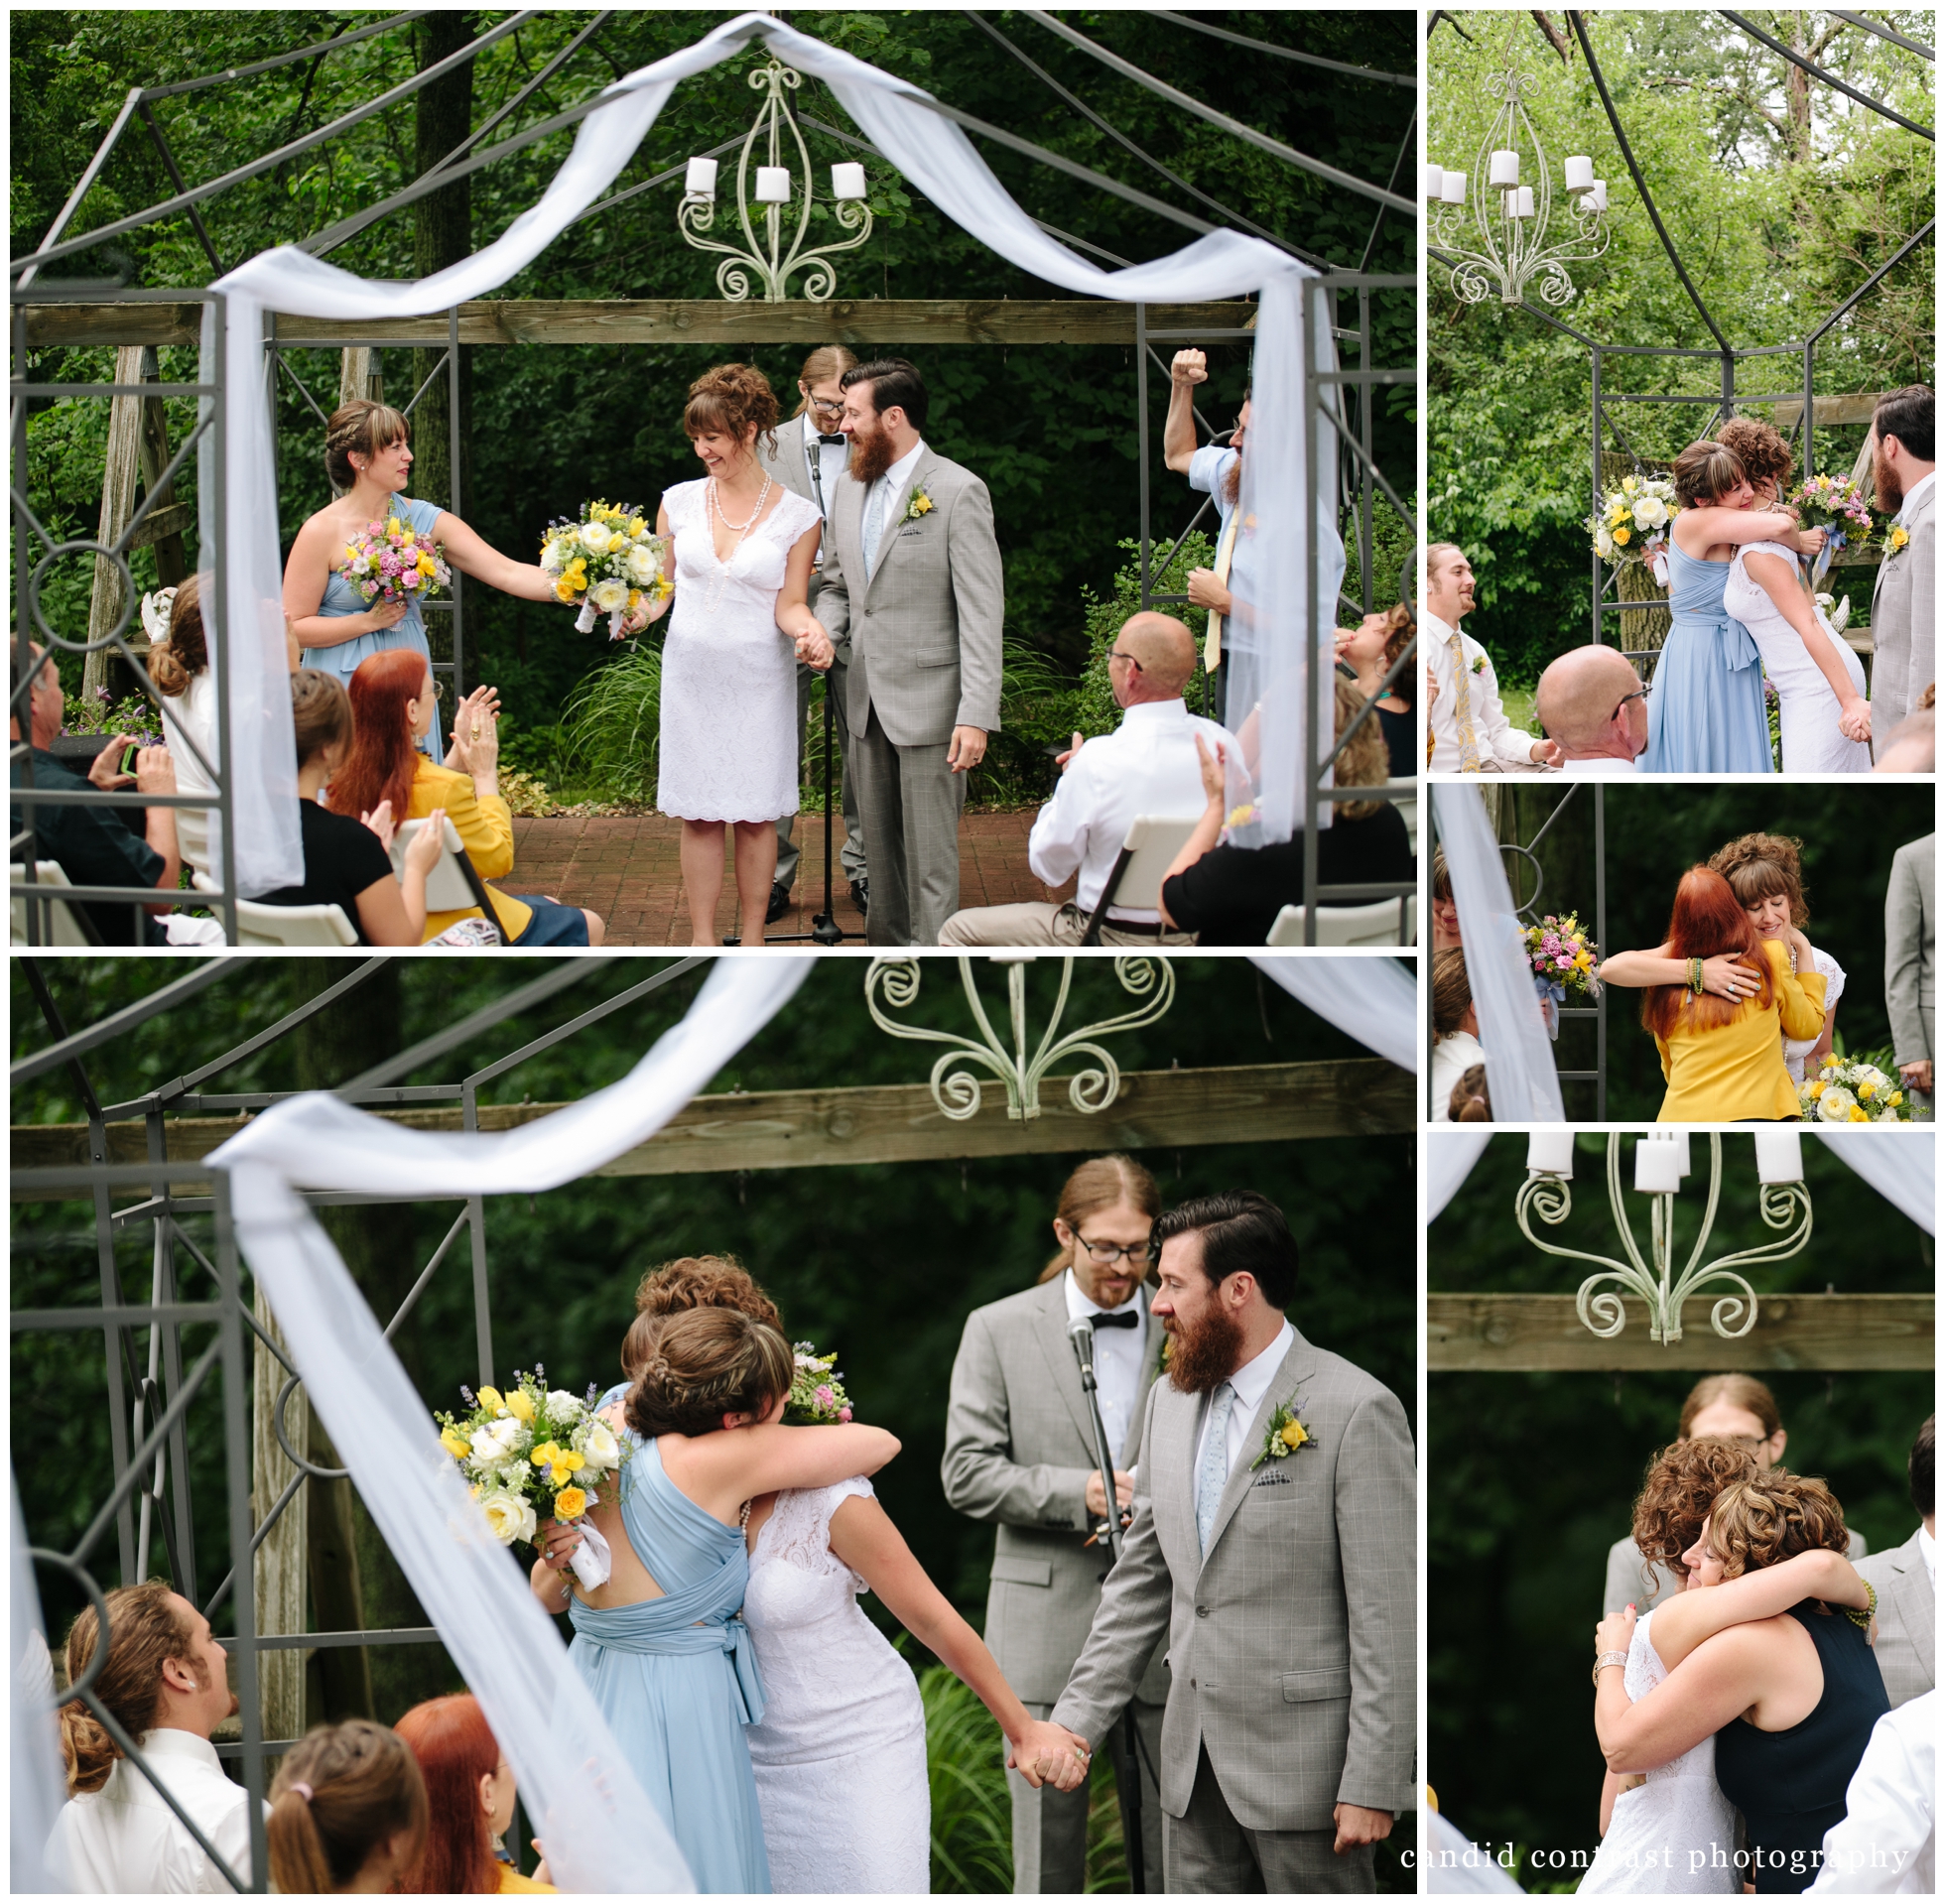 wedding ceremony candid moments at backyard wedding in dubuque, ia, candid contrast photography